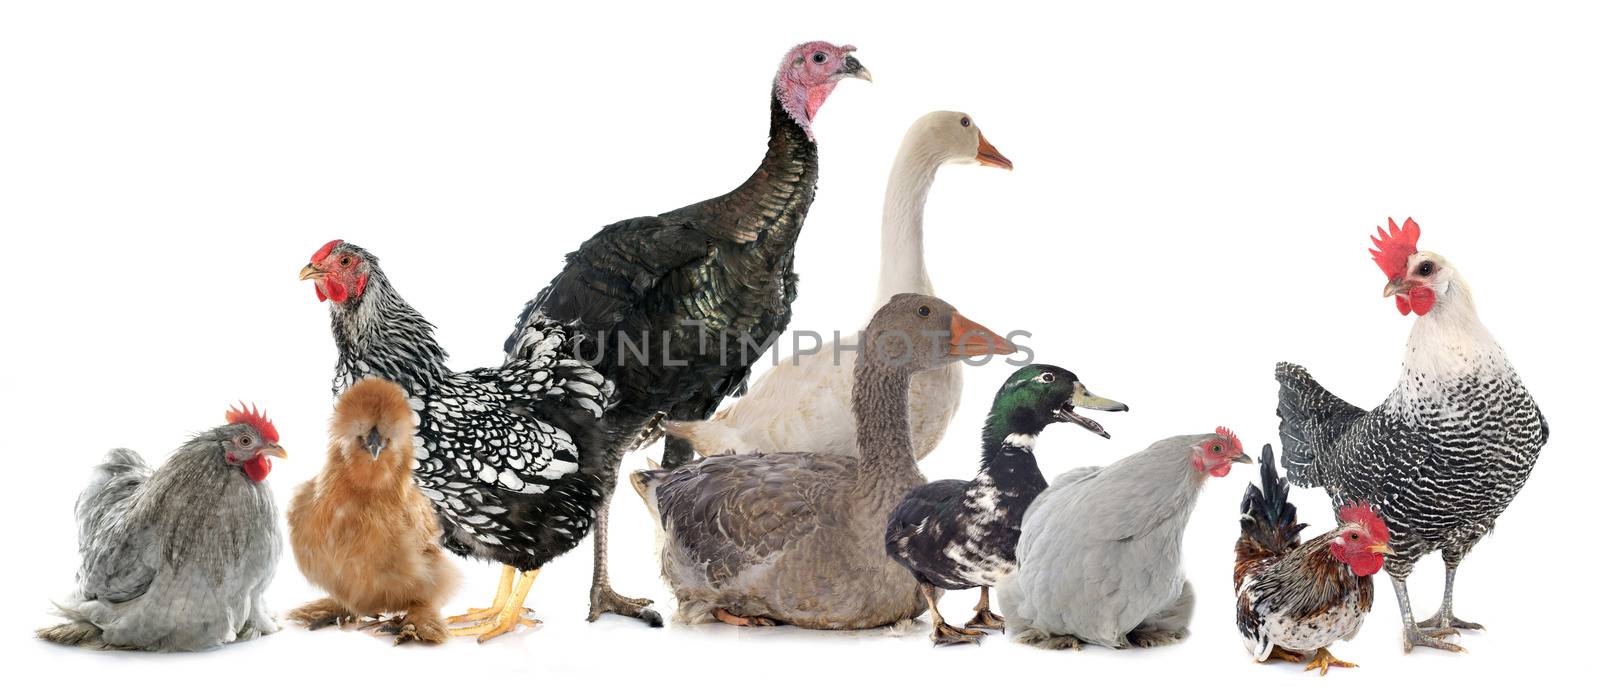 group of poultry by cynoclub